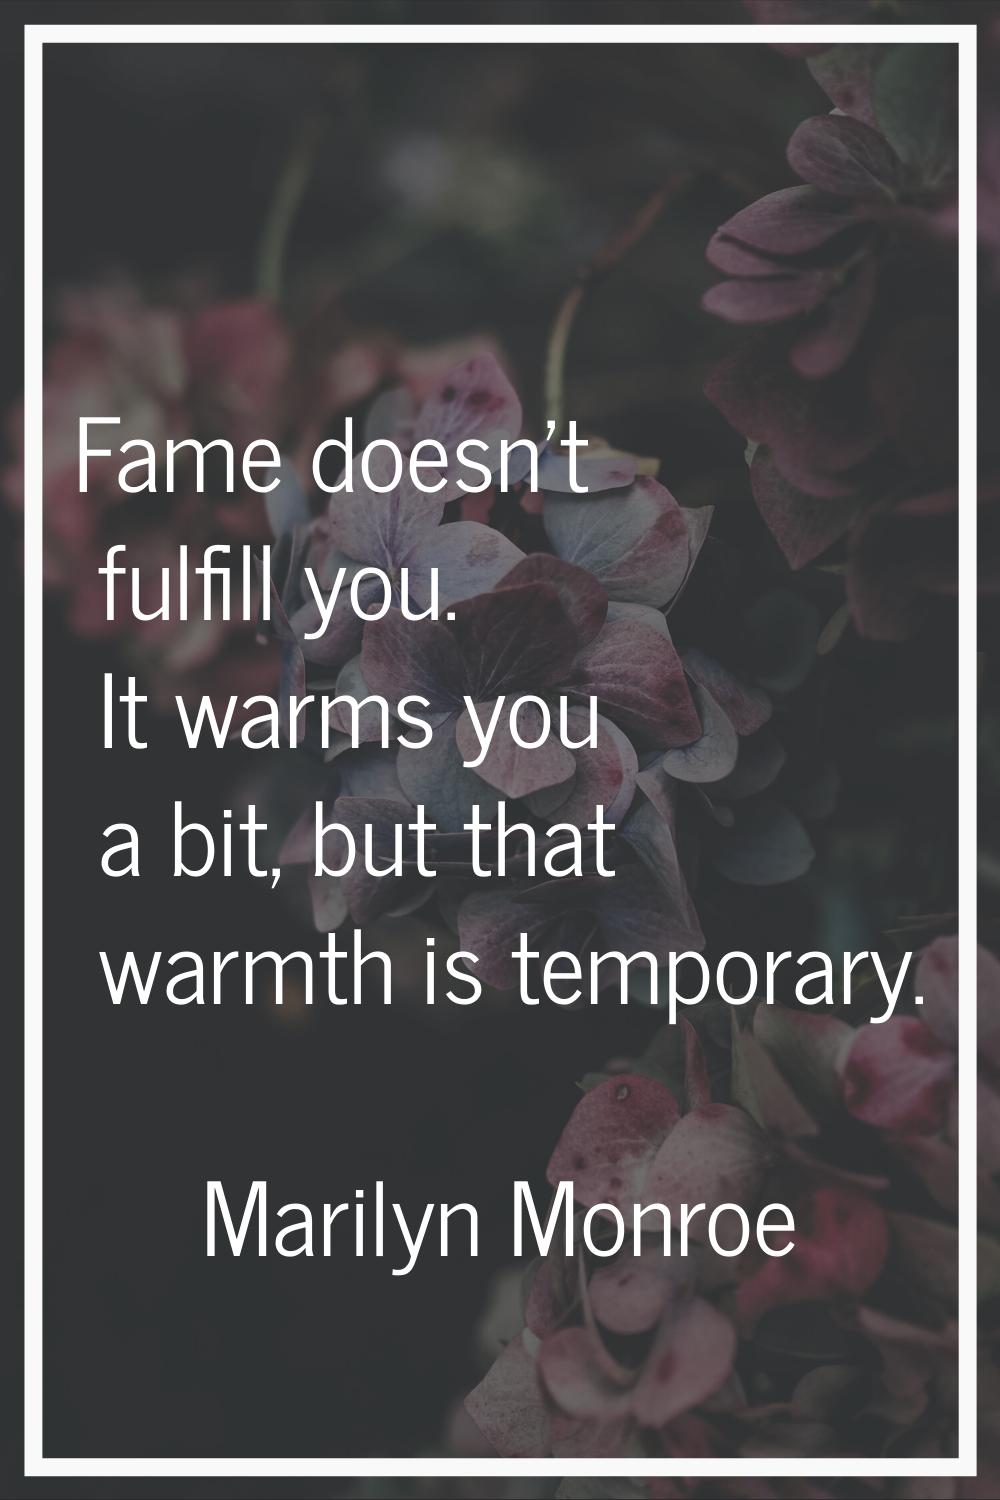 Fame doesn't fulfill you. It warms you a bit, but that warmth is temporary.